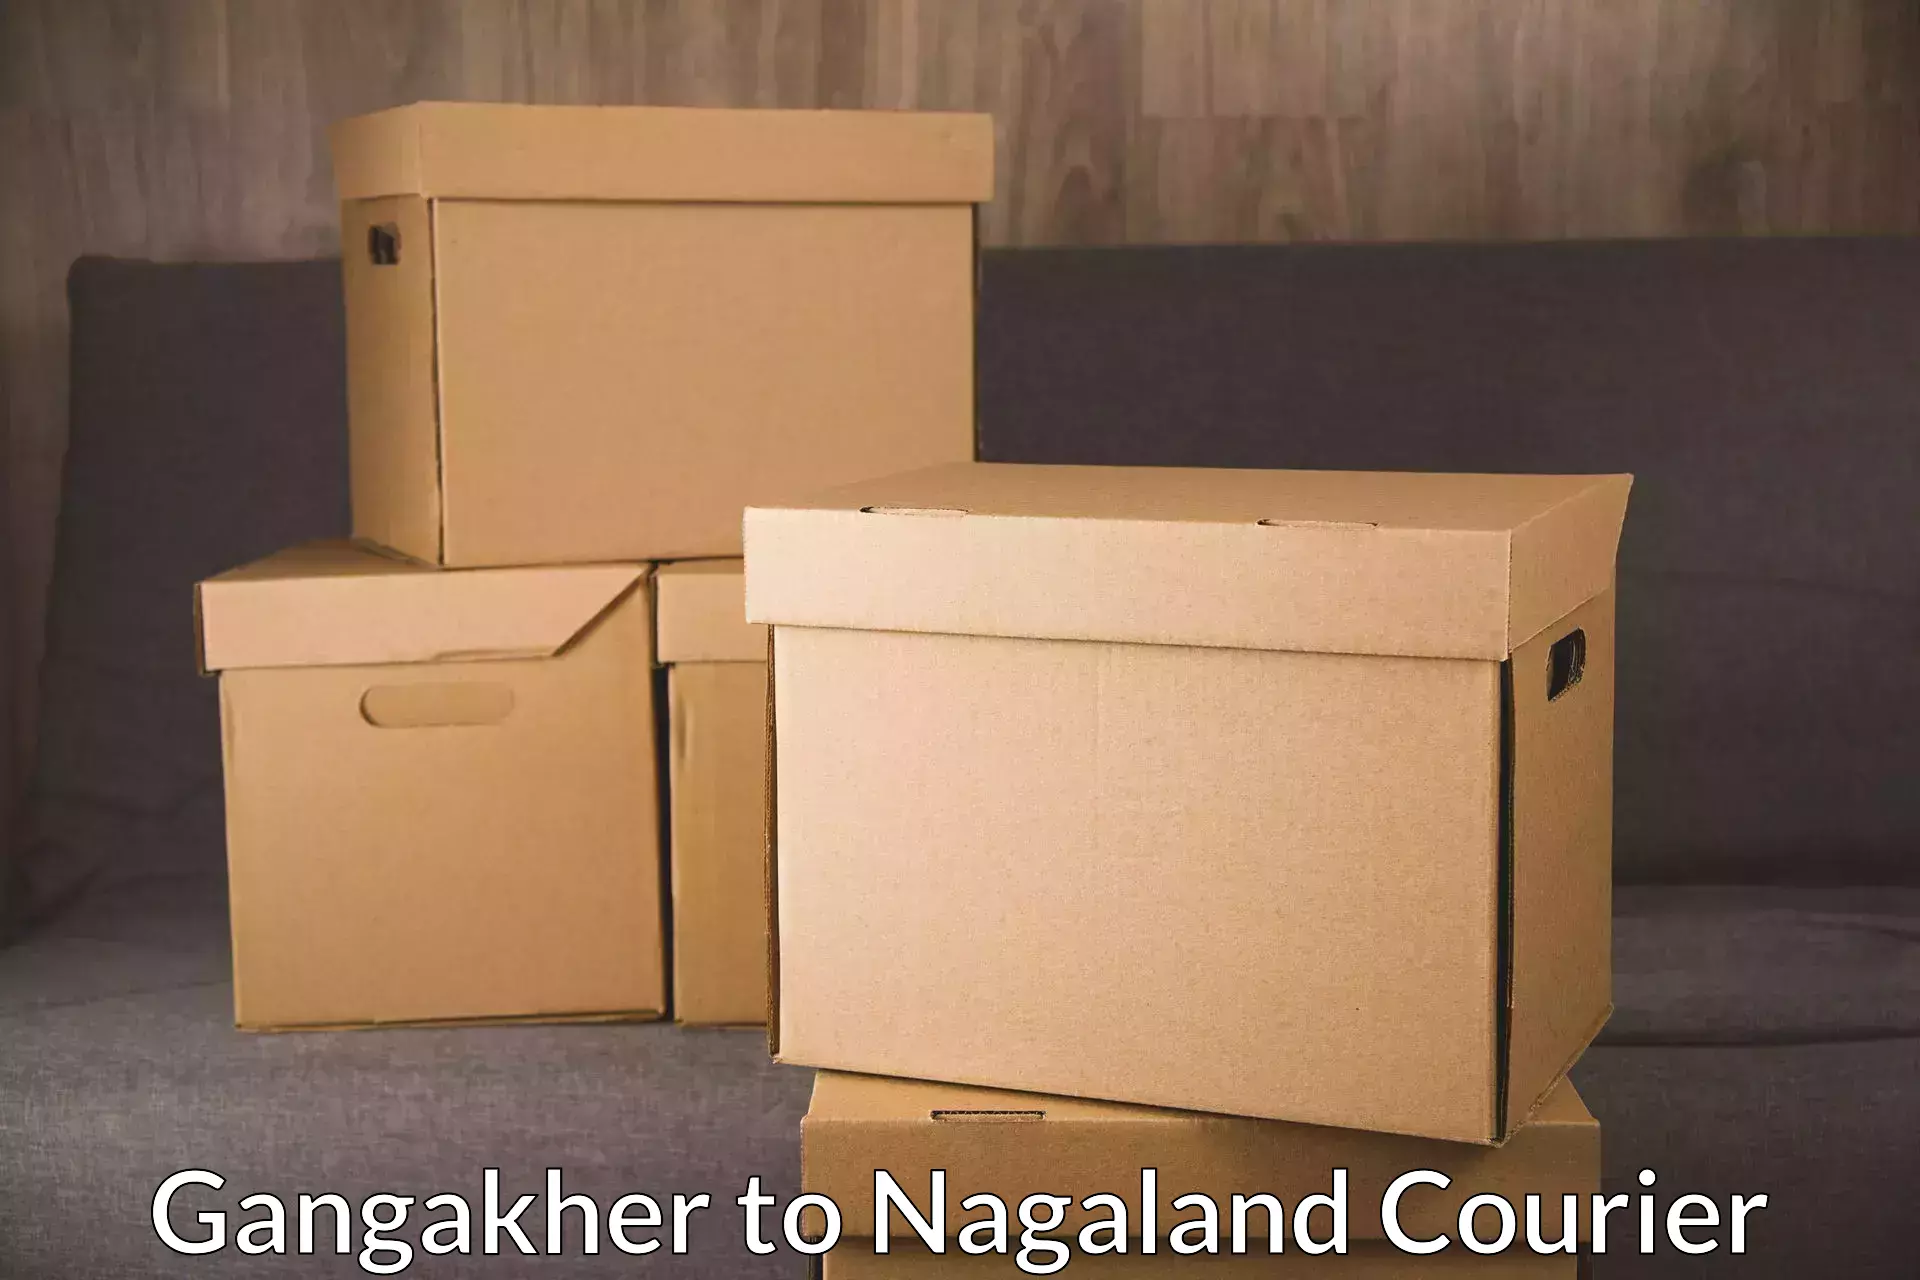 High-speed parcel service Gangakher to Mon